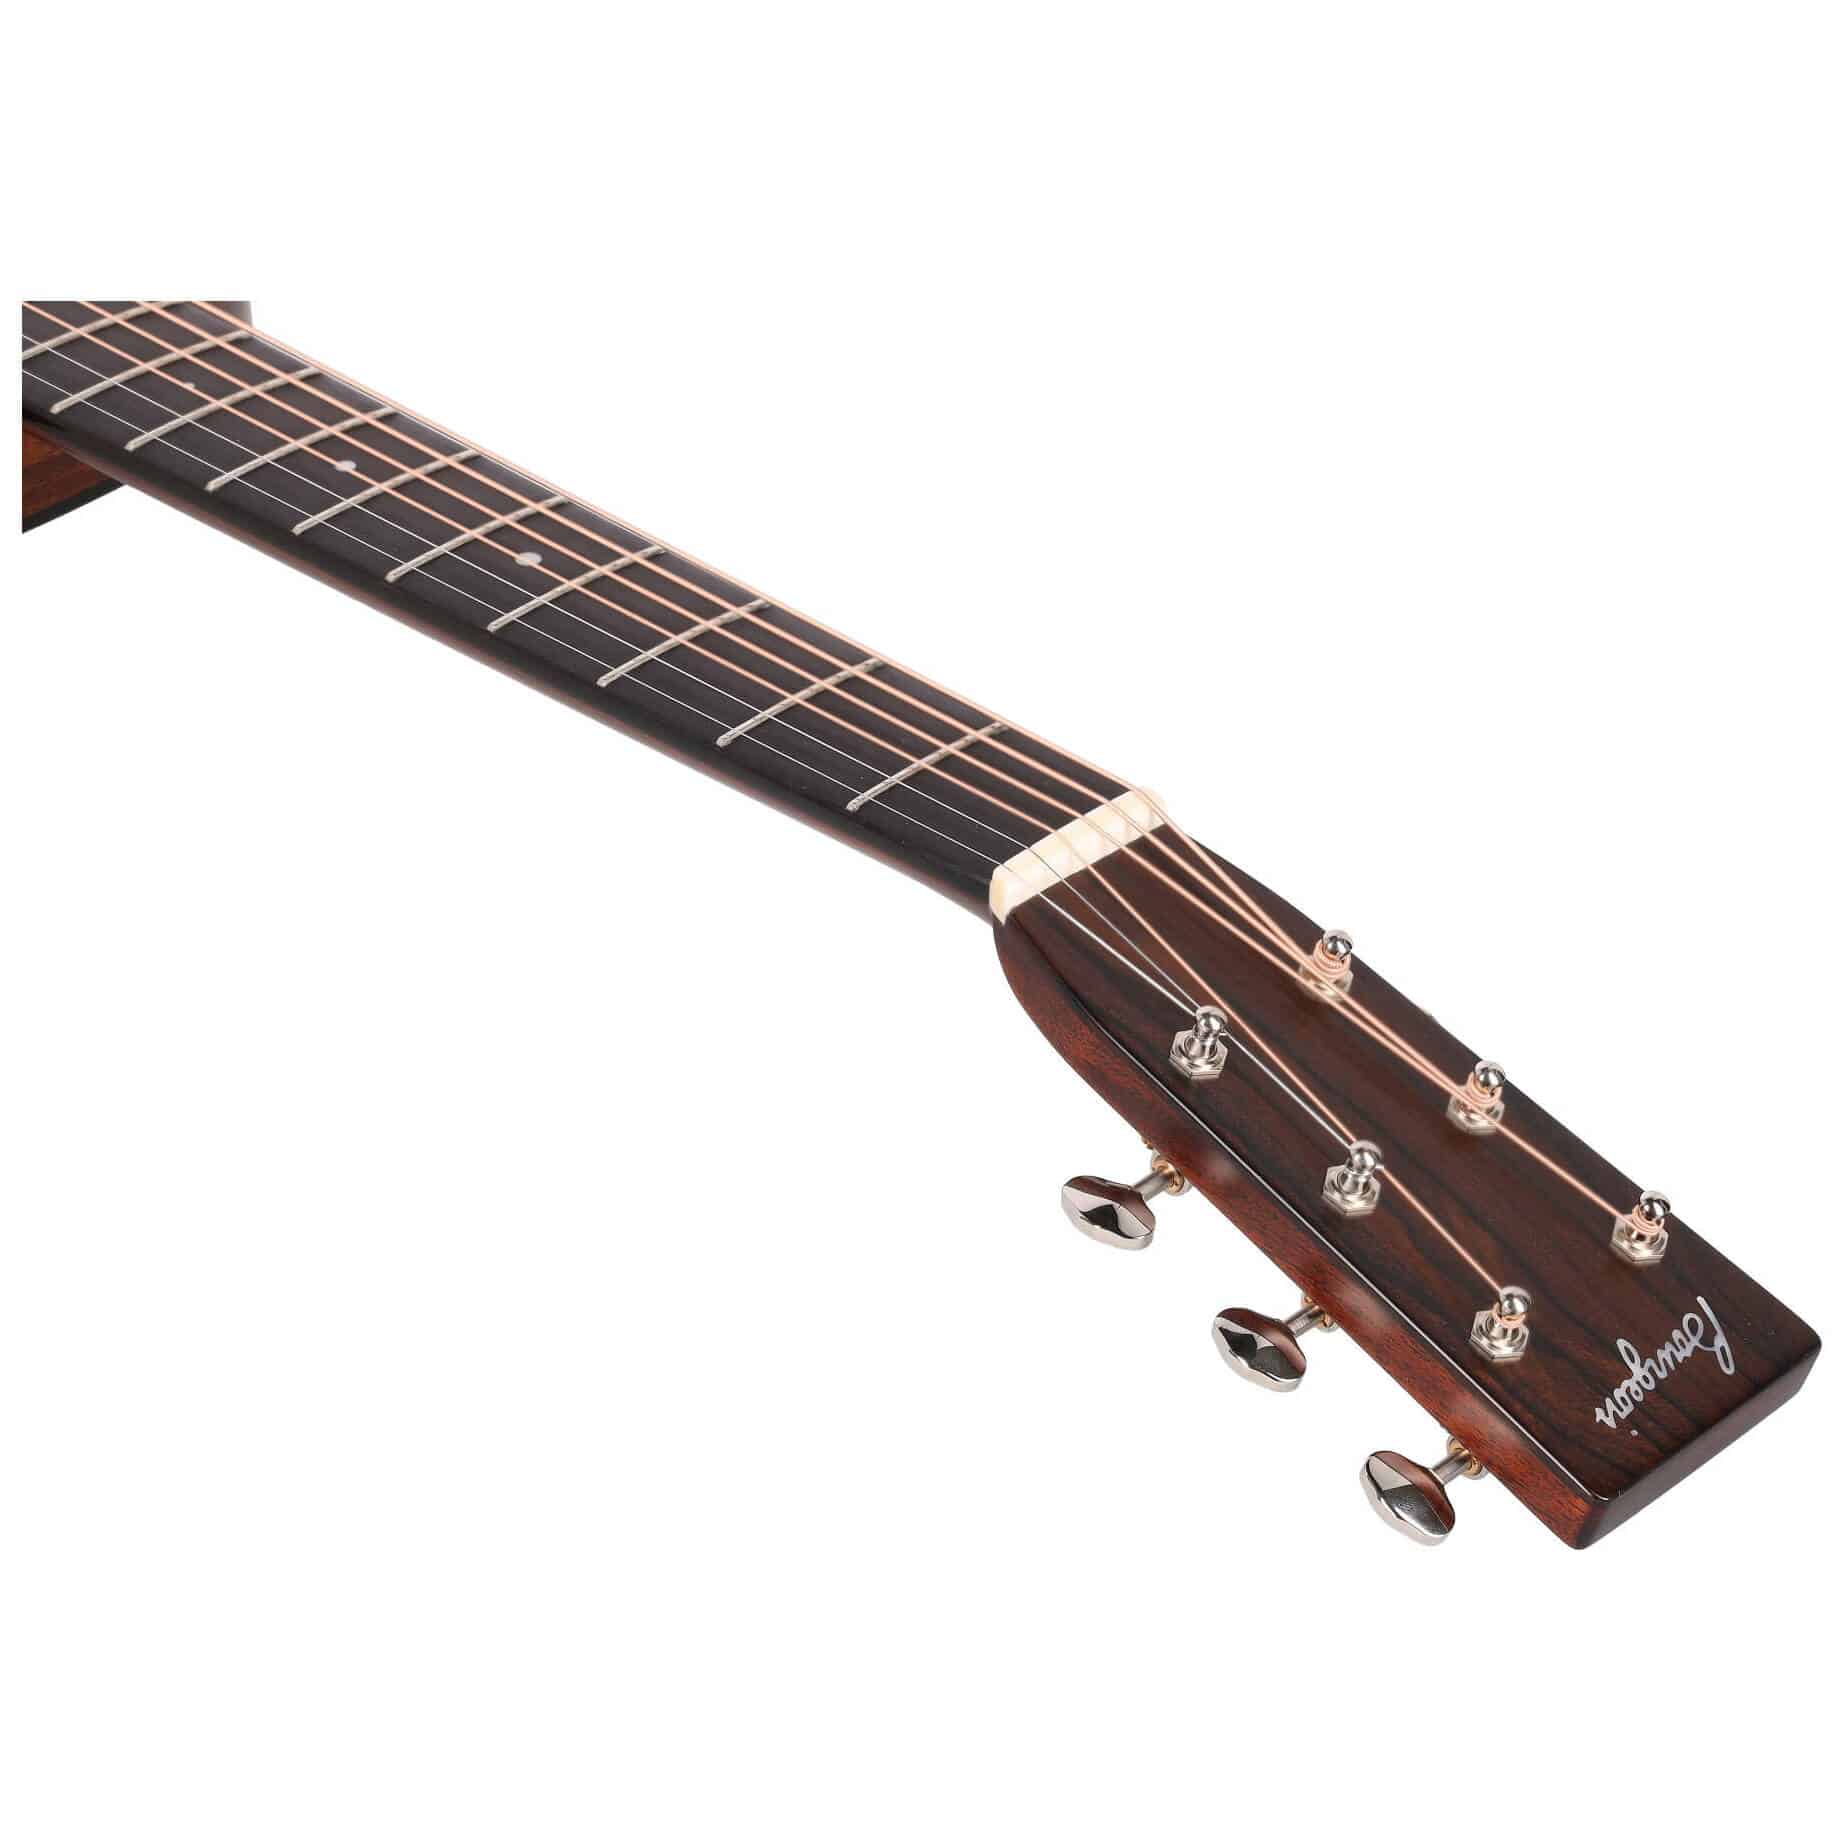 Bourgeois Guitars OM CountryBoy Touchstone 14